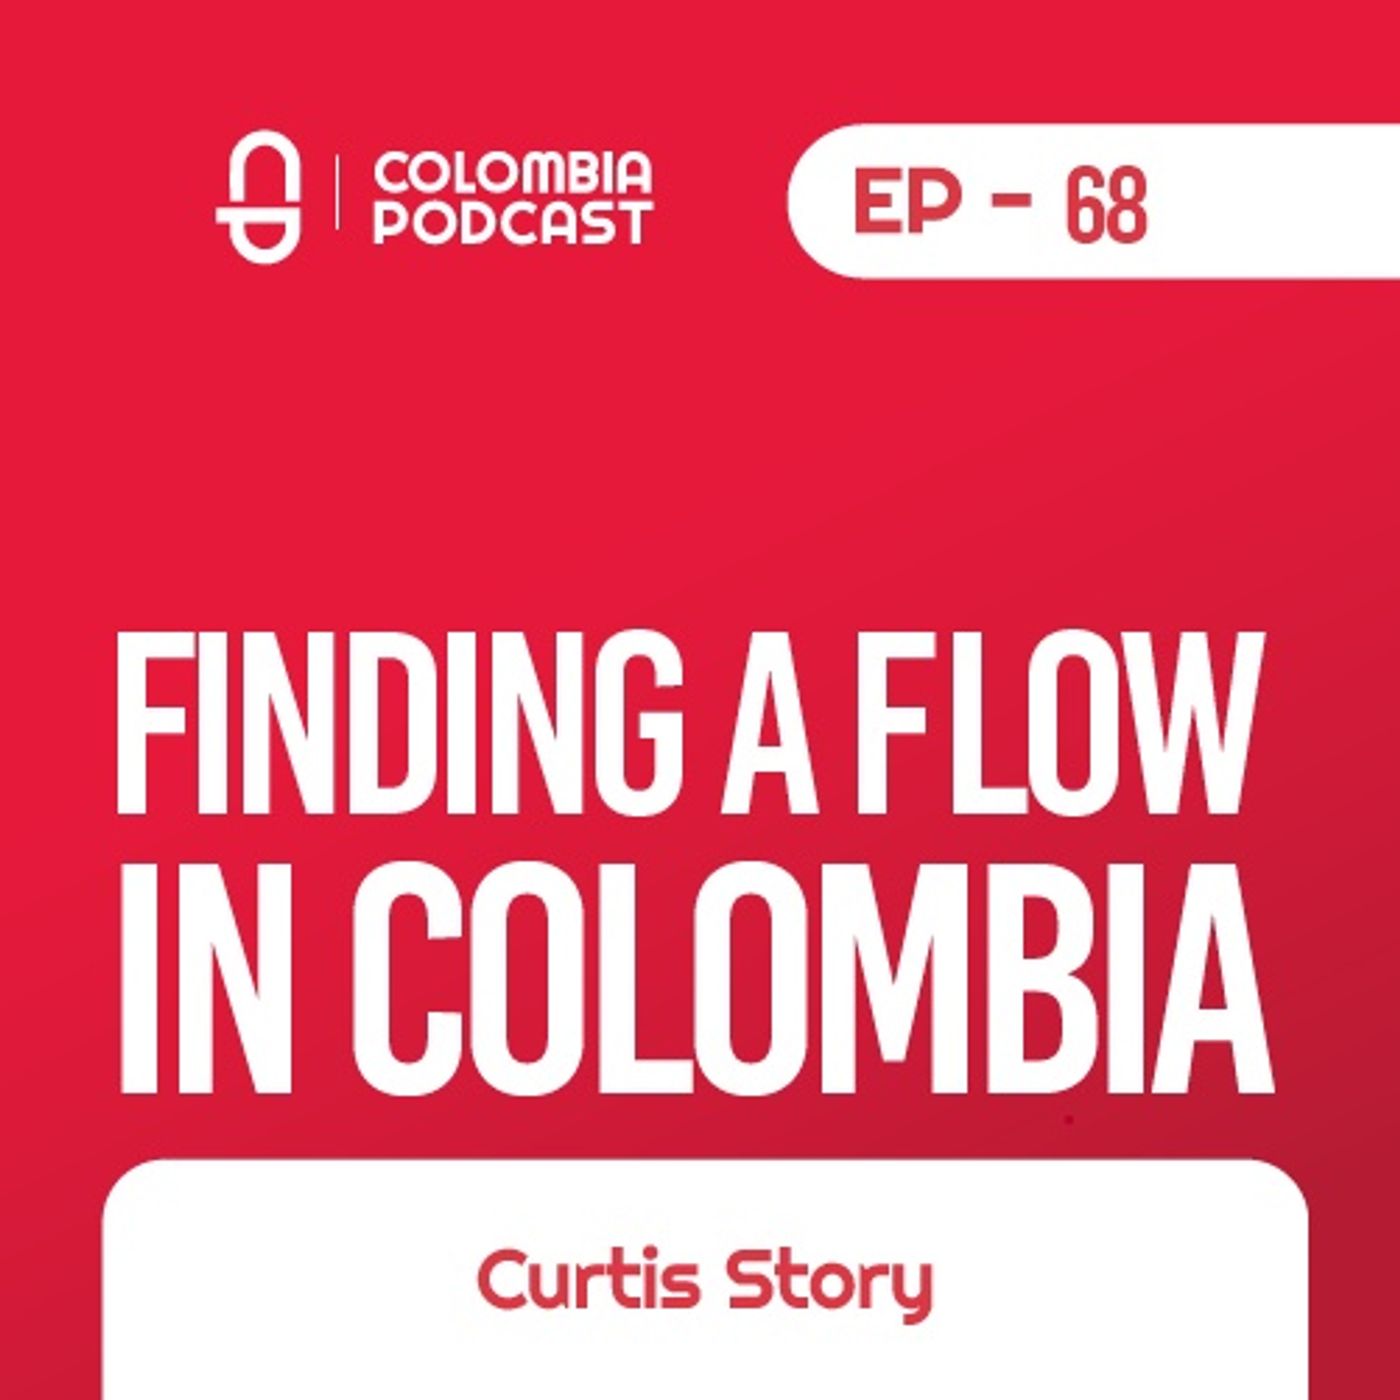 Moving to Colombia and Finding His Flow  - Curtis's Story (Episode 68)